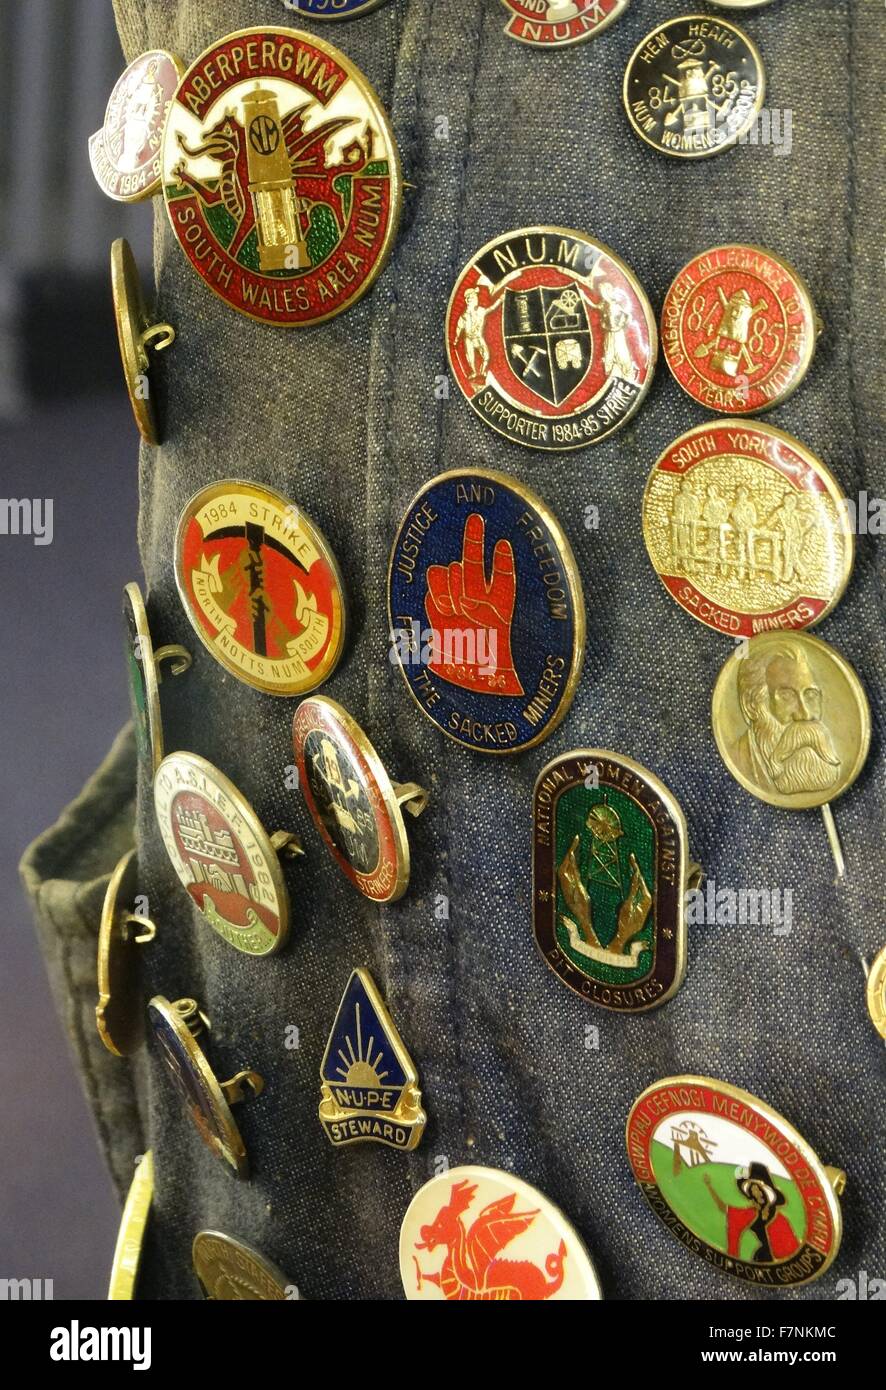 Badges of support for the British Miners strike of 1984-1985. At the end of the strike the National Union of Miners was left weakened and mining communities divided between supporters and opponents of the industrial action 1985 Stock Photo